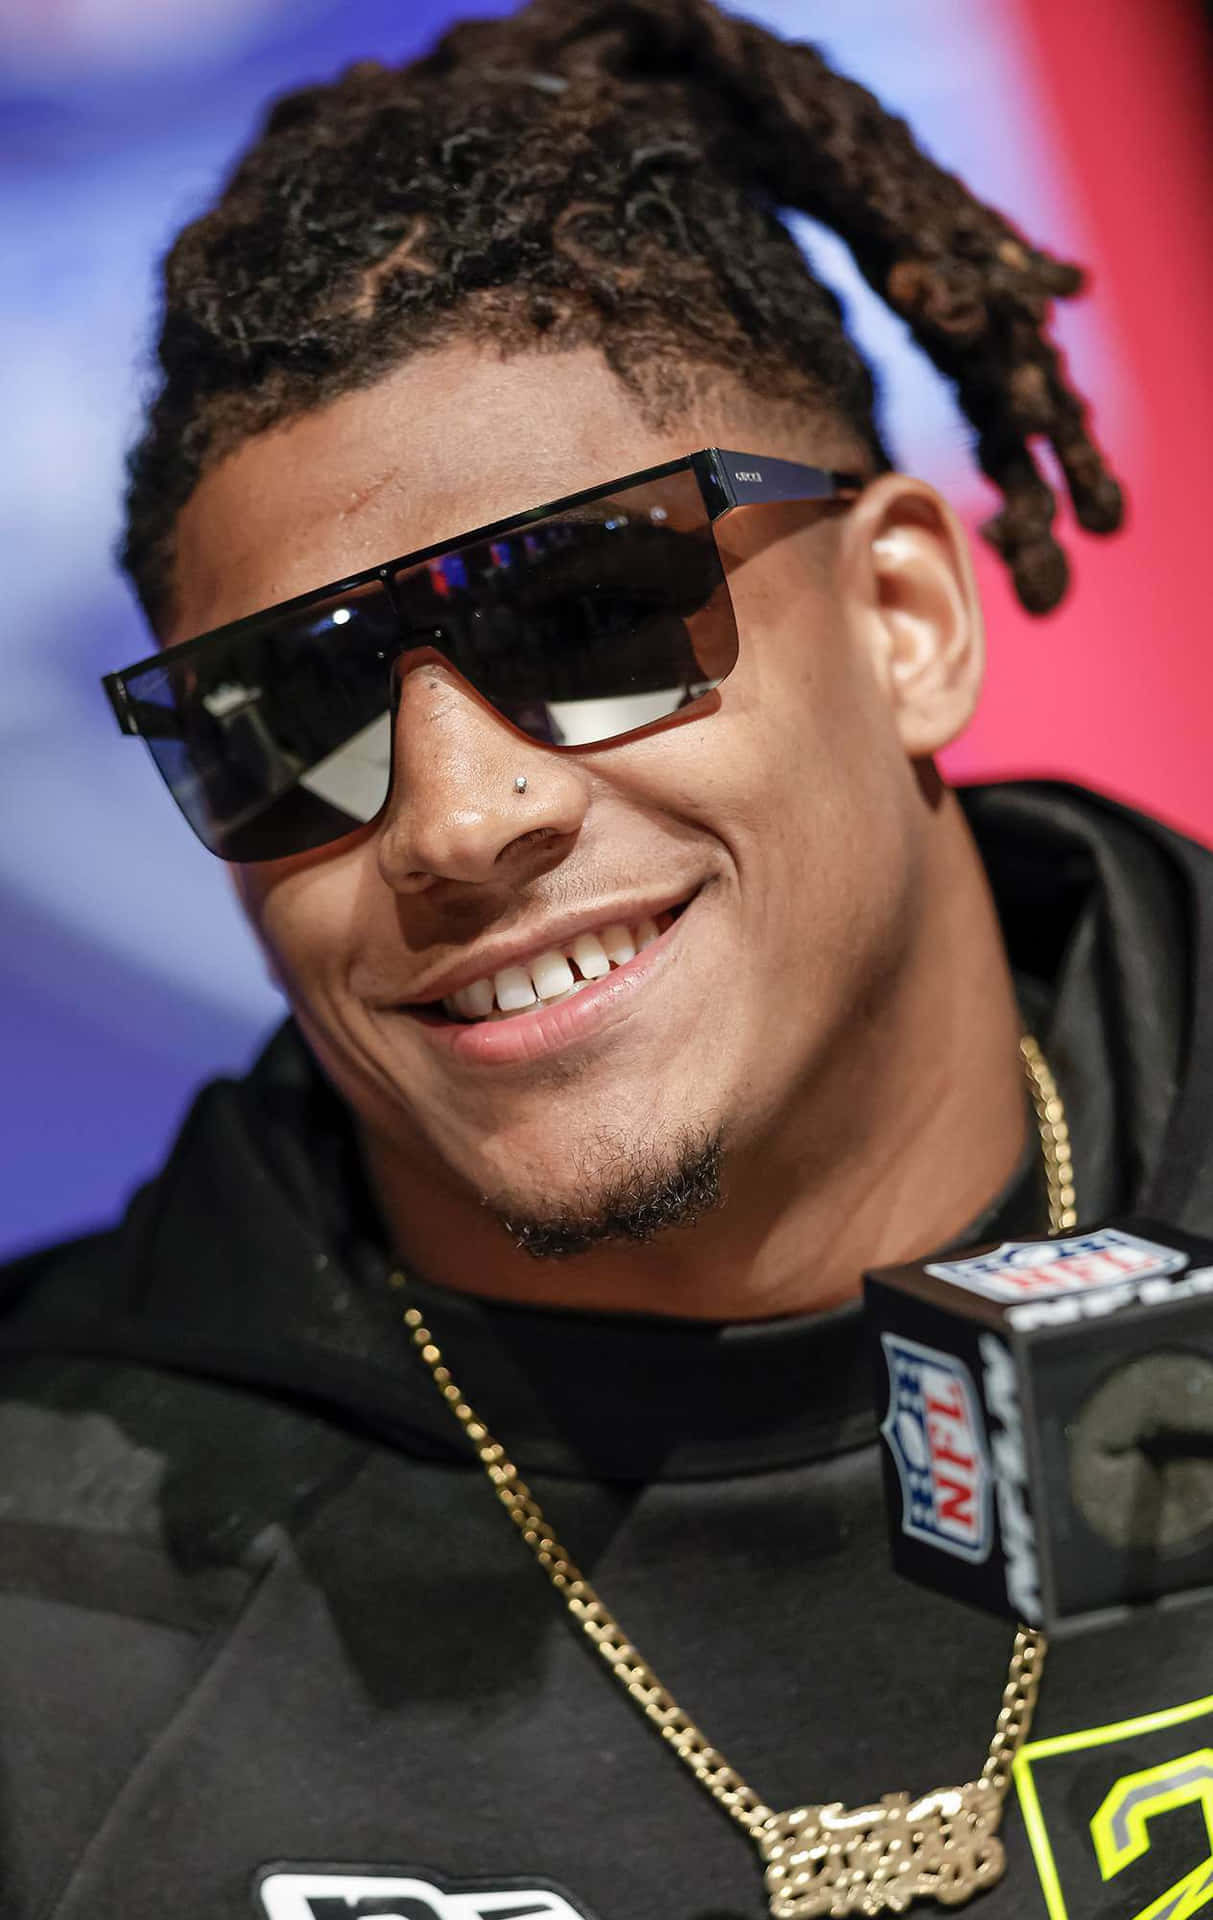 Smiling Athletewith Sunglasses Wallpaper